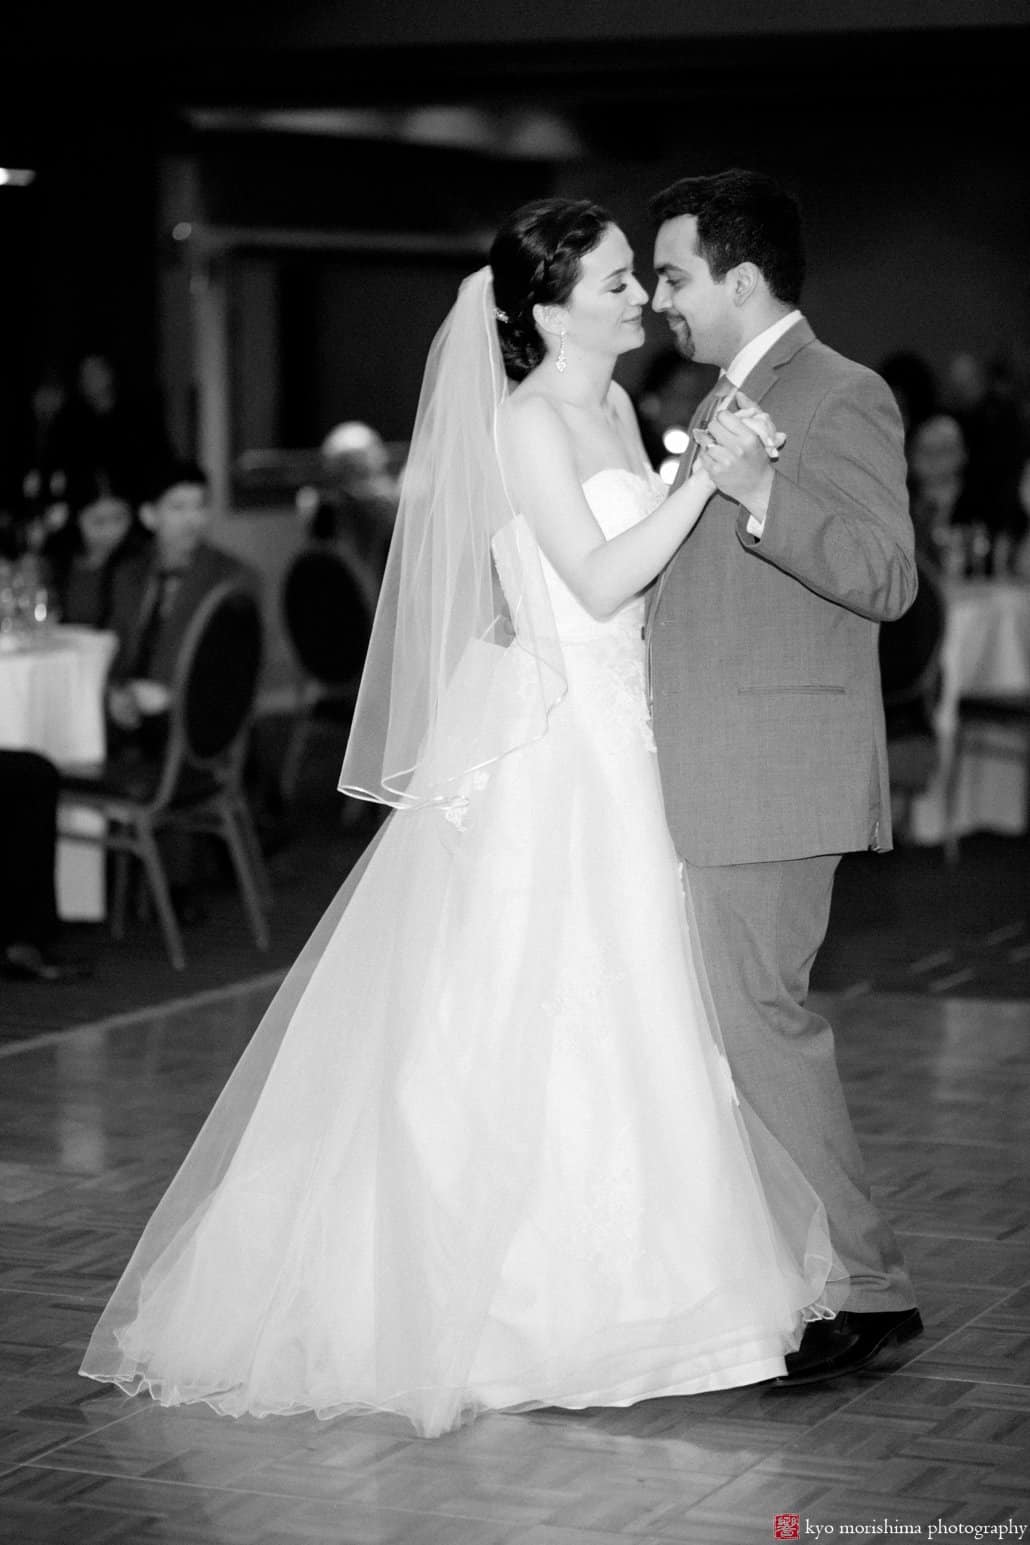 Bride and groom first dance during Chart House wedding reception, photographed by Kyo Morishima